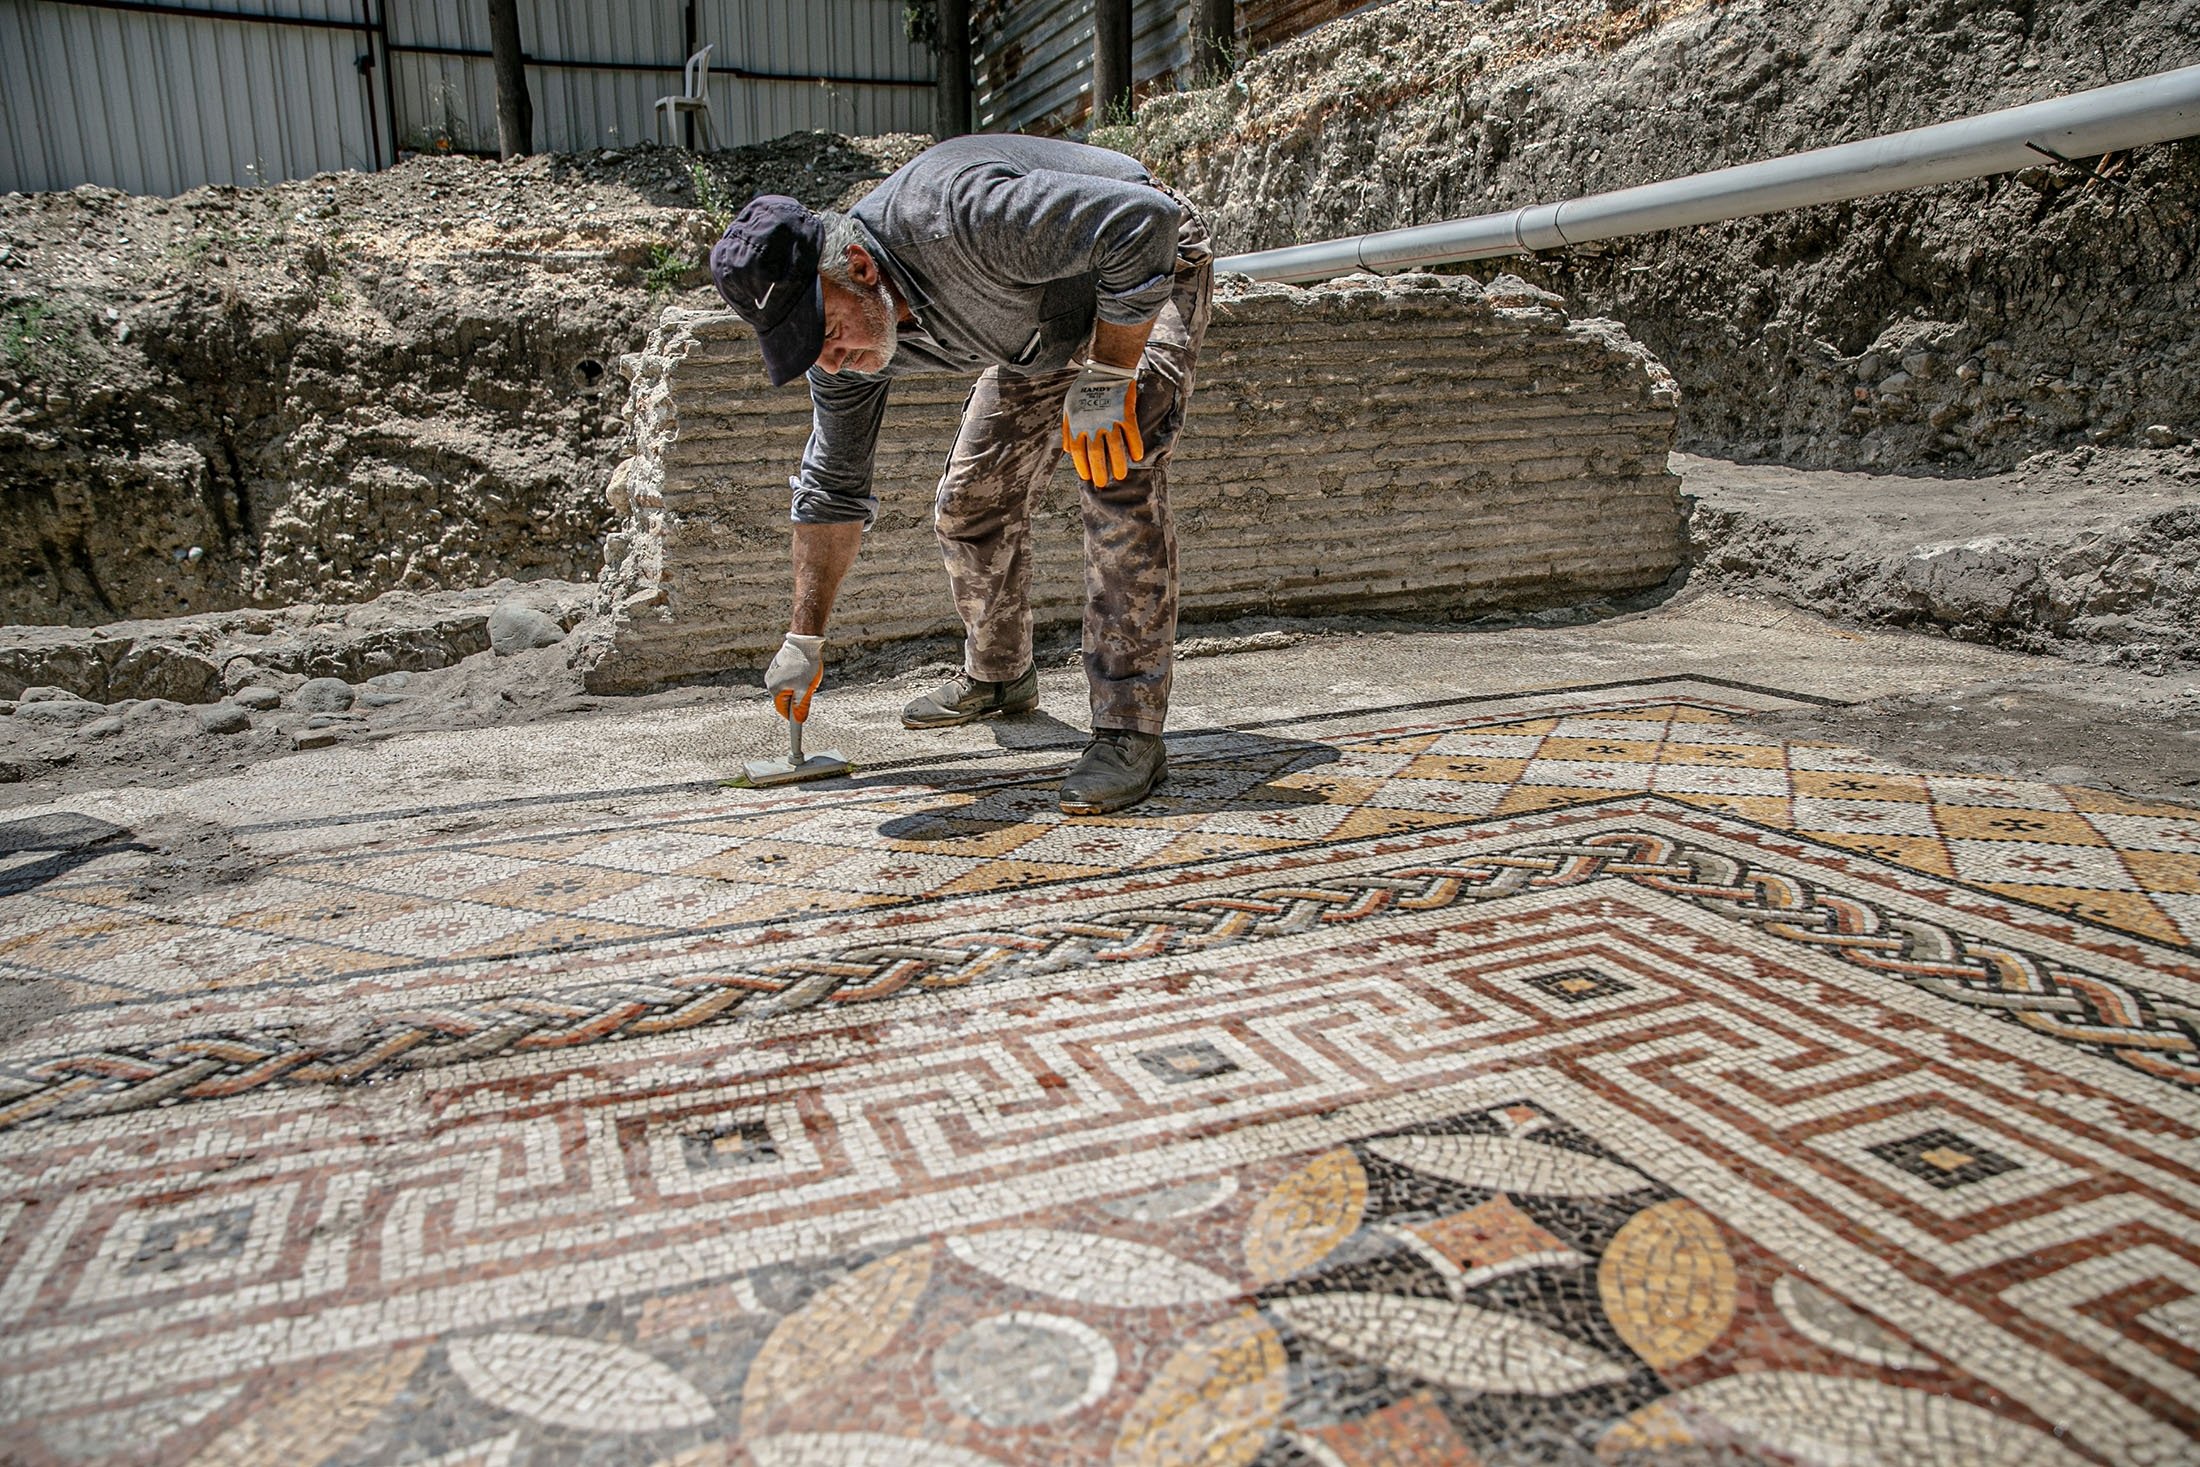 A worker cleans the mosaic on the floor of a recently discovered Roman villa in the Defne district of Hatay, southern Turkey, July 4, 2022. (AA Photo)